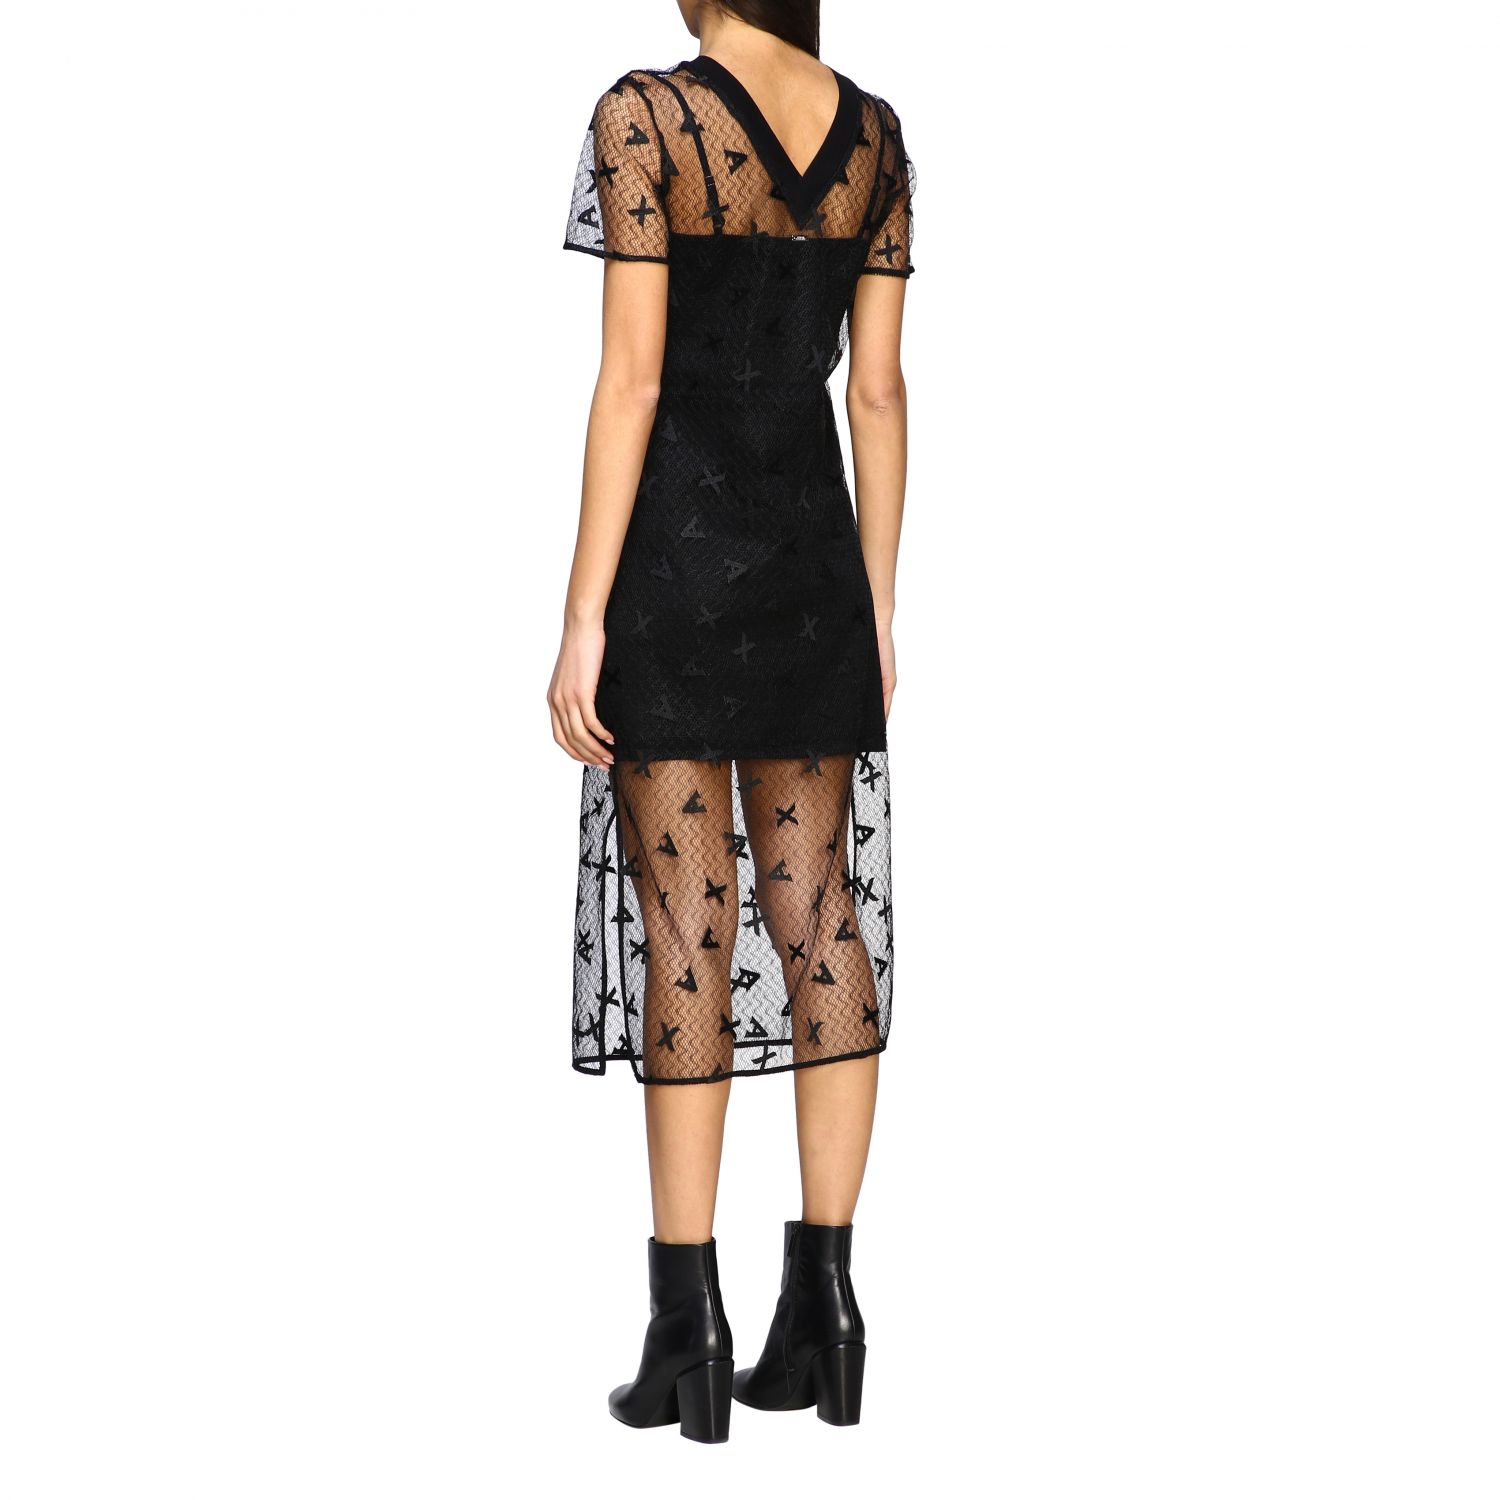 Armani Exchange dress in branded tulle 